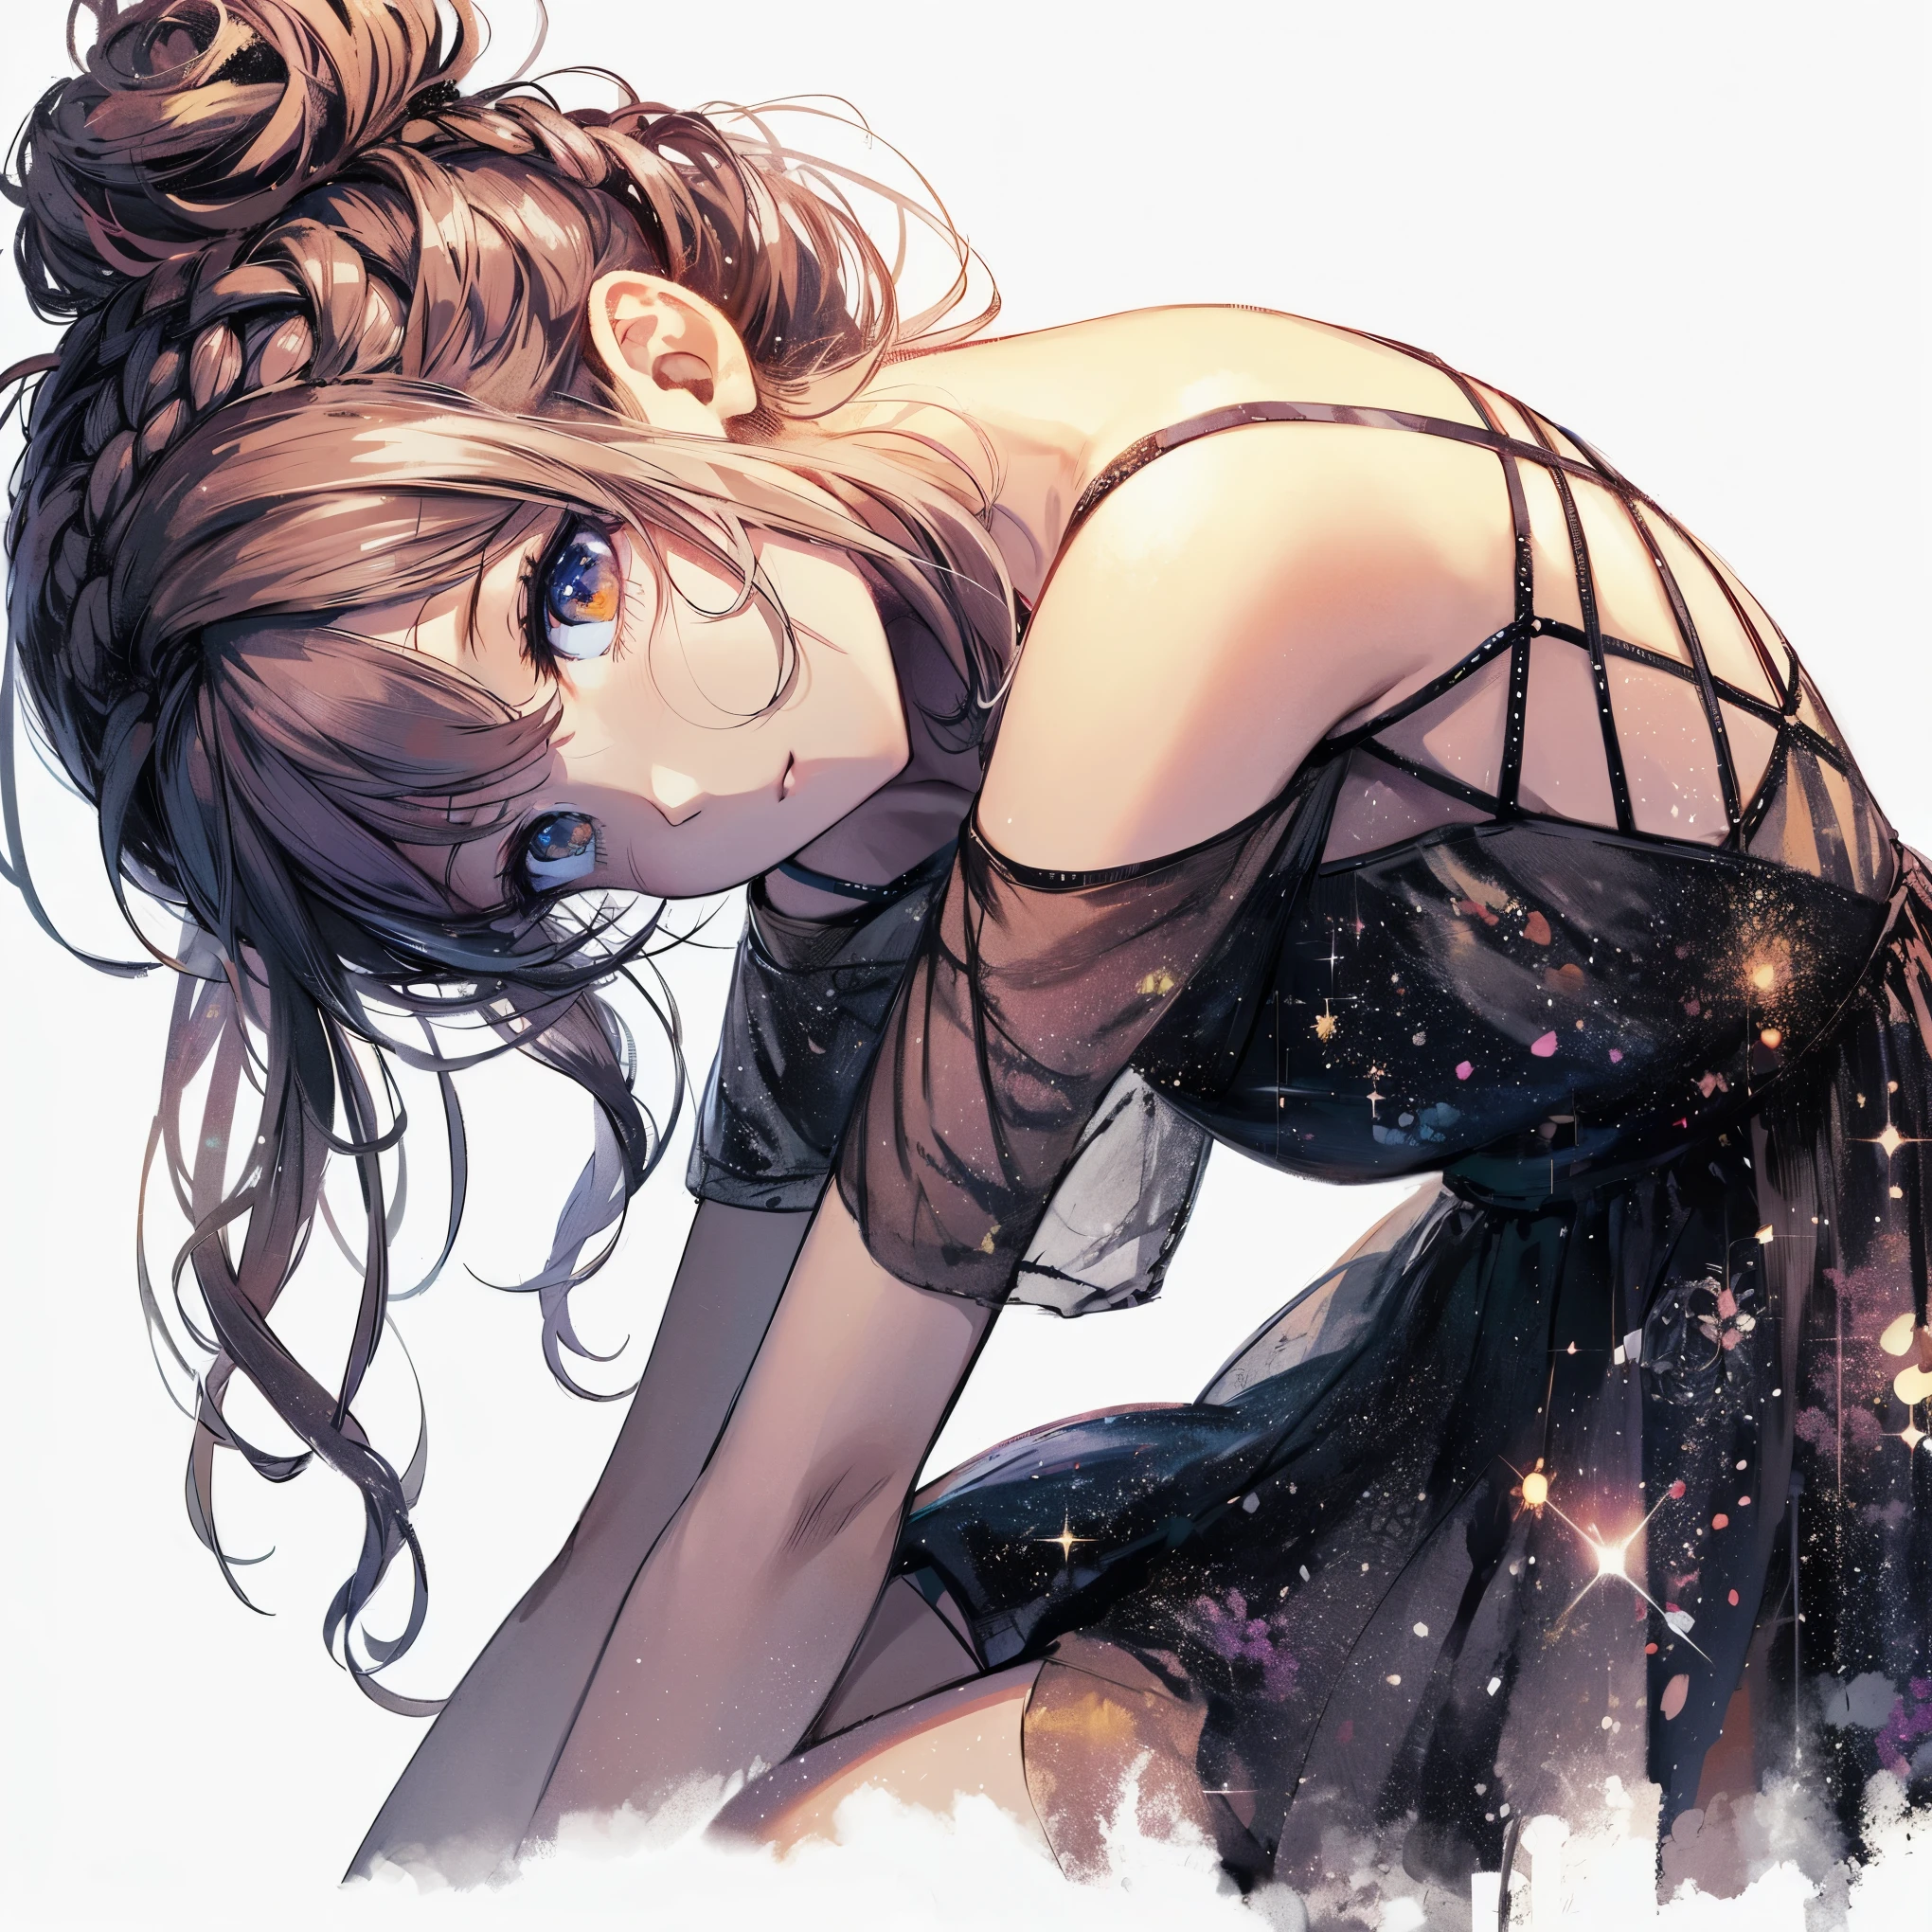 fille animée with long hair and black dress with stars in the background, beautiful fille animée, fille animée wearing a black dress, (fille animée), bel animé portrait, bel animé style, fille animée with cosmic hair, waifu anime mignon dans une jolie robe, pretty fille animée, bel animé woman, bel animé, fille animée, profile of fille animée, guweiz, Beaux yeux dessinés en détail, détaillée belle gros seins sexy